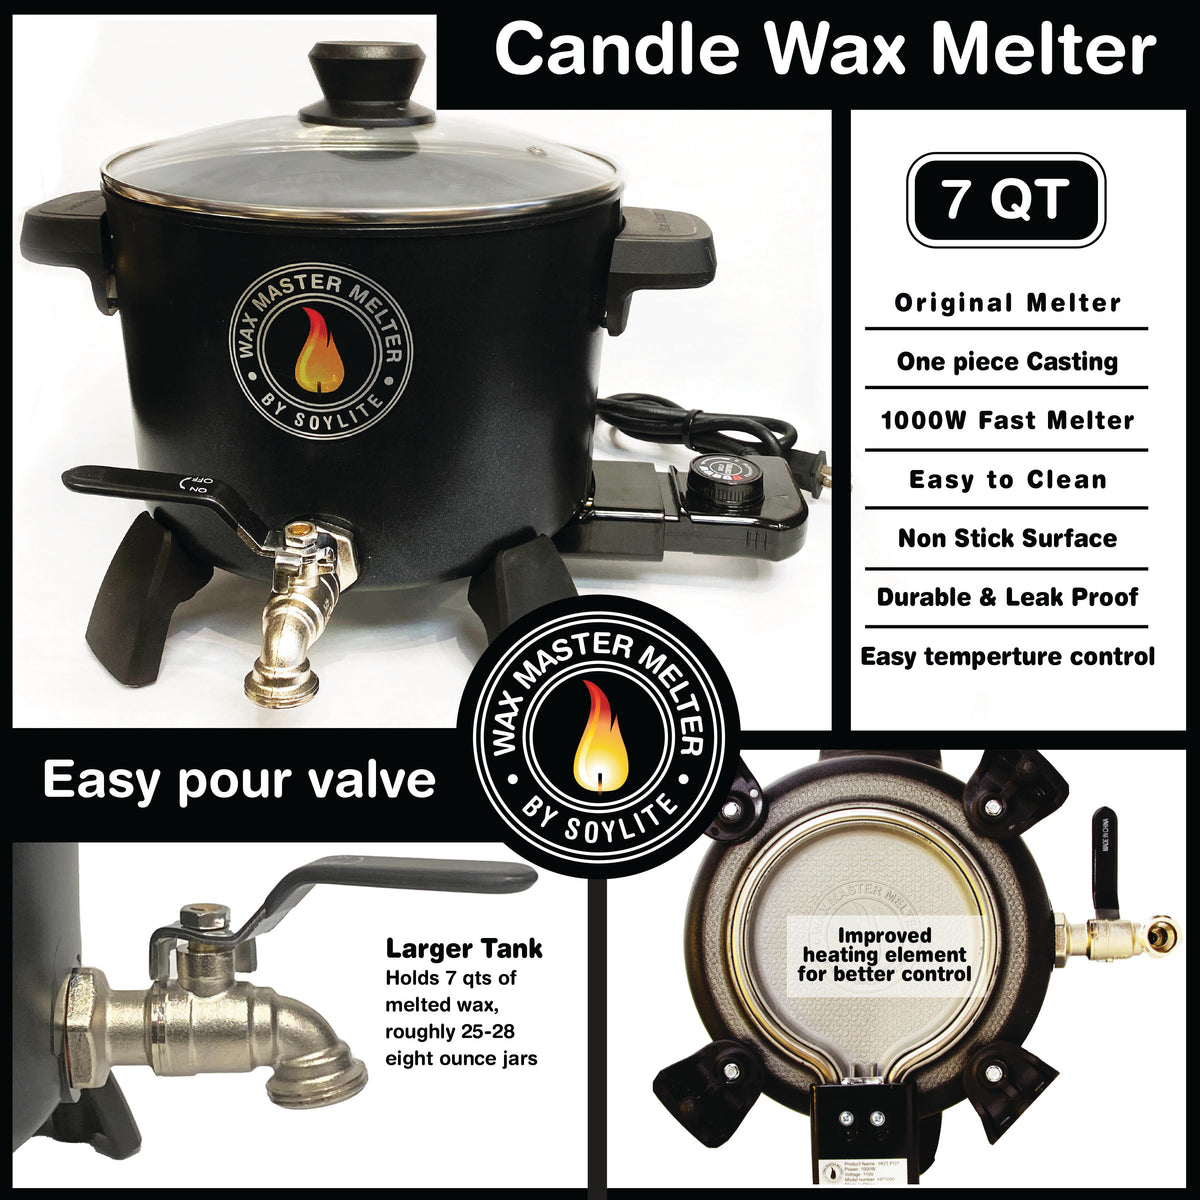 Wax melter for candle making – everything you need to know